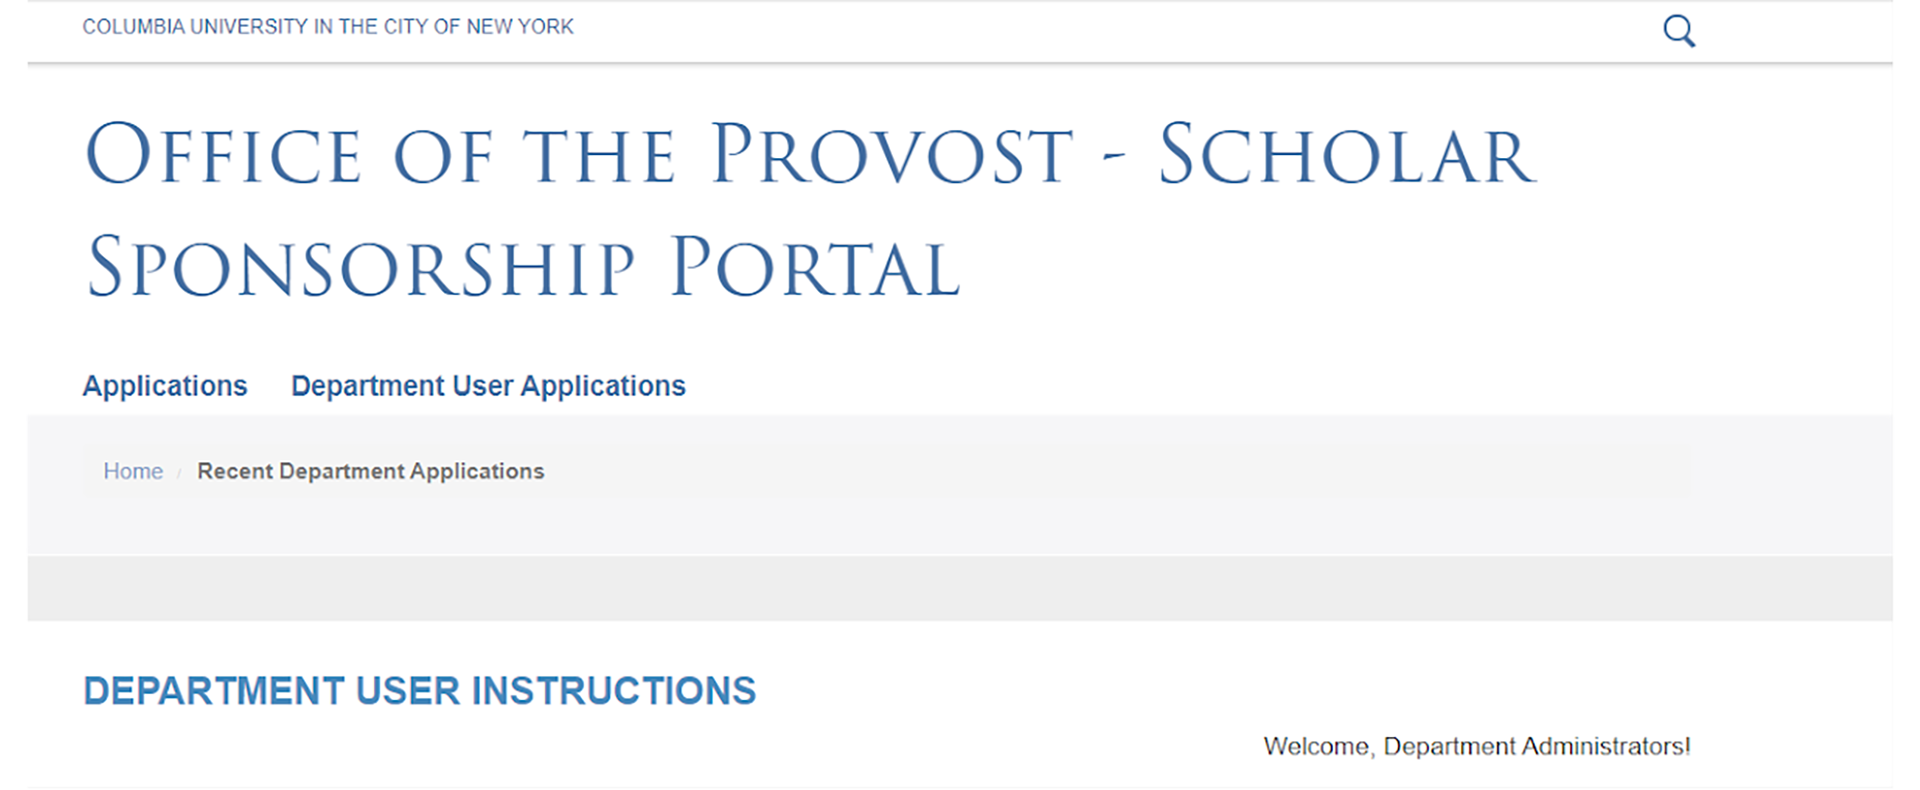 screenshot of scholar sponsorship portal (ssp) showing applications tabs and user instructions heading